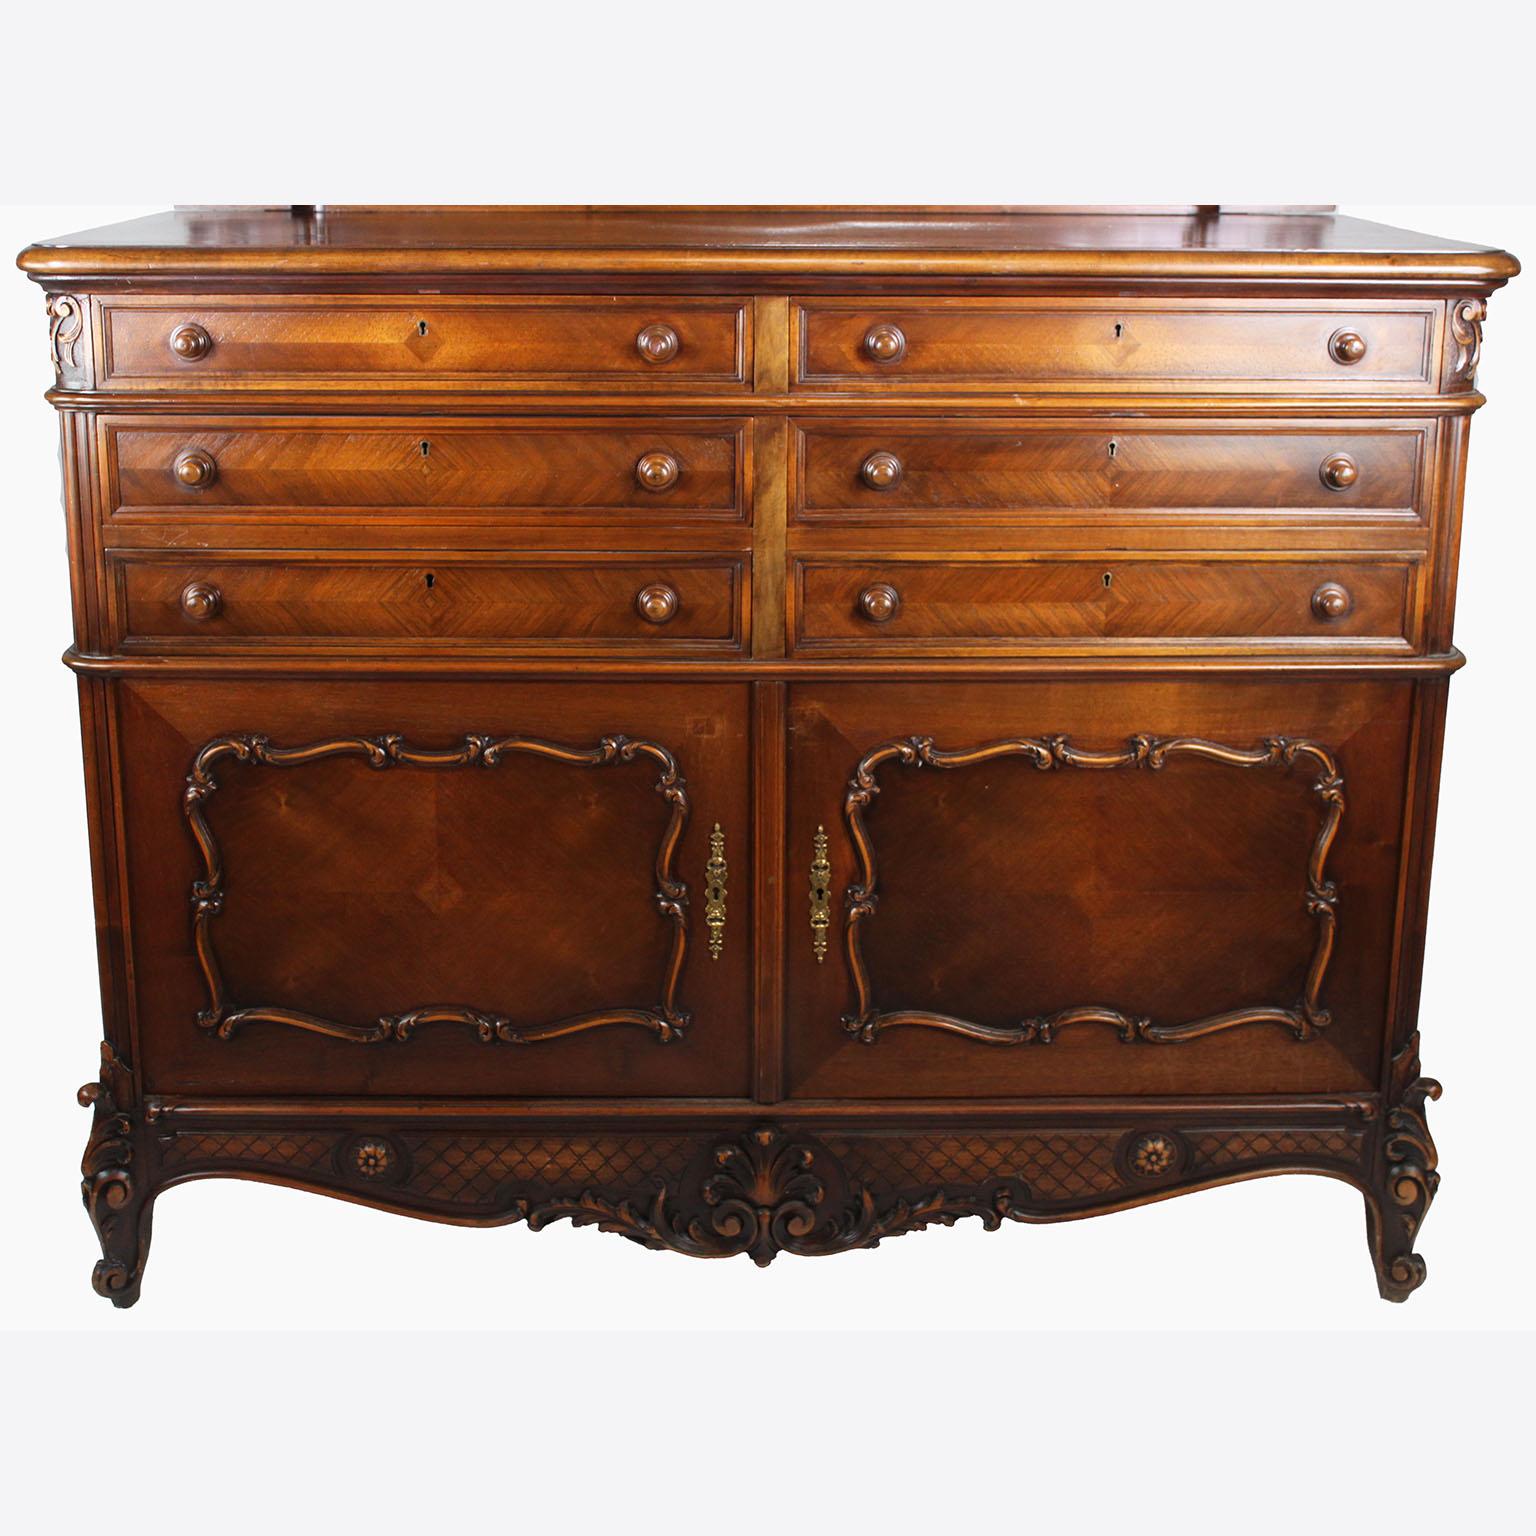 Beveled Country French 19th/20th Century Louis XV Provençal Style Carved Walnut Vanity For Sale